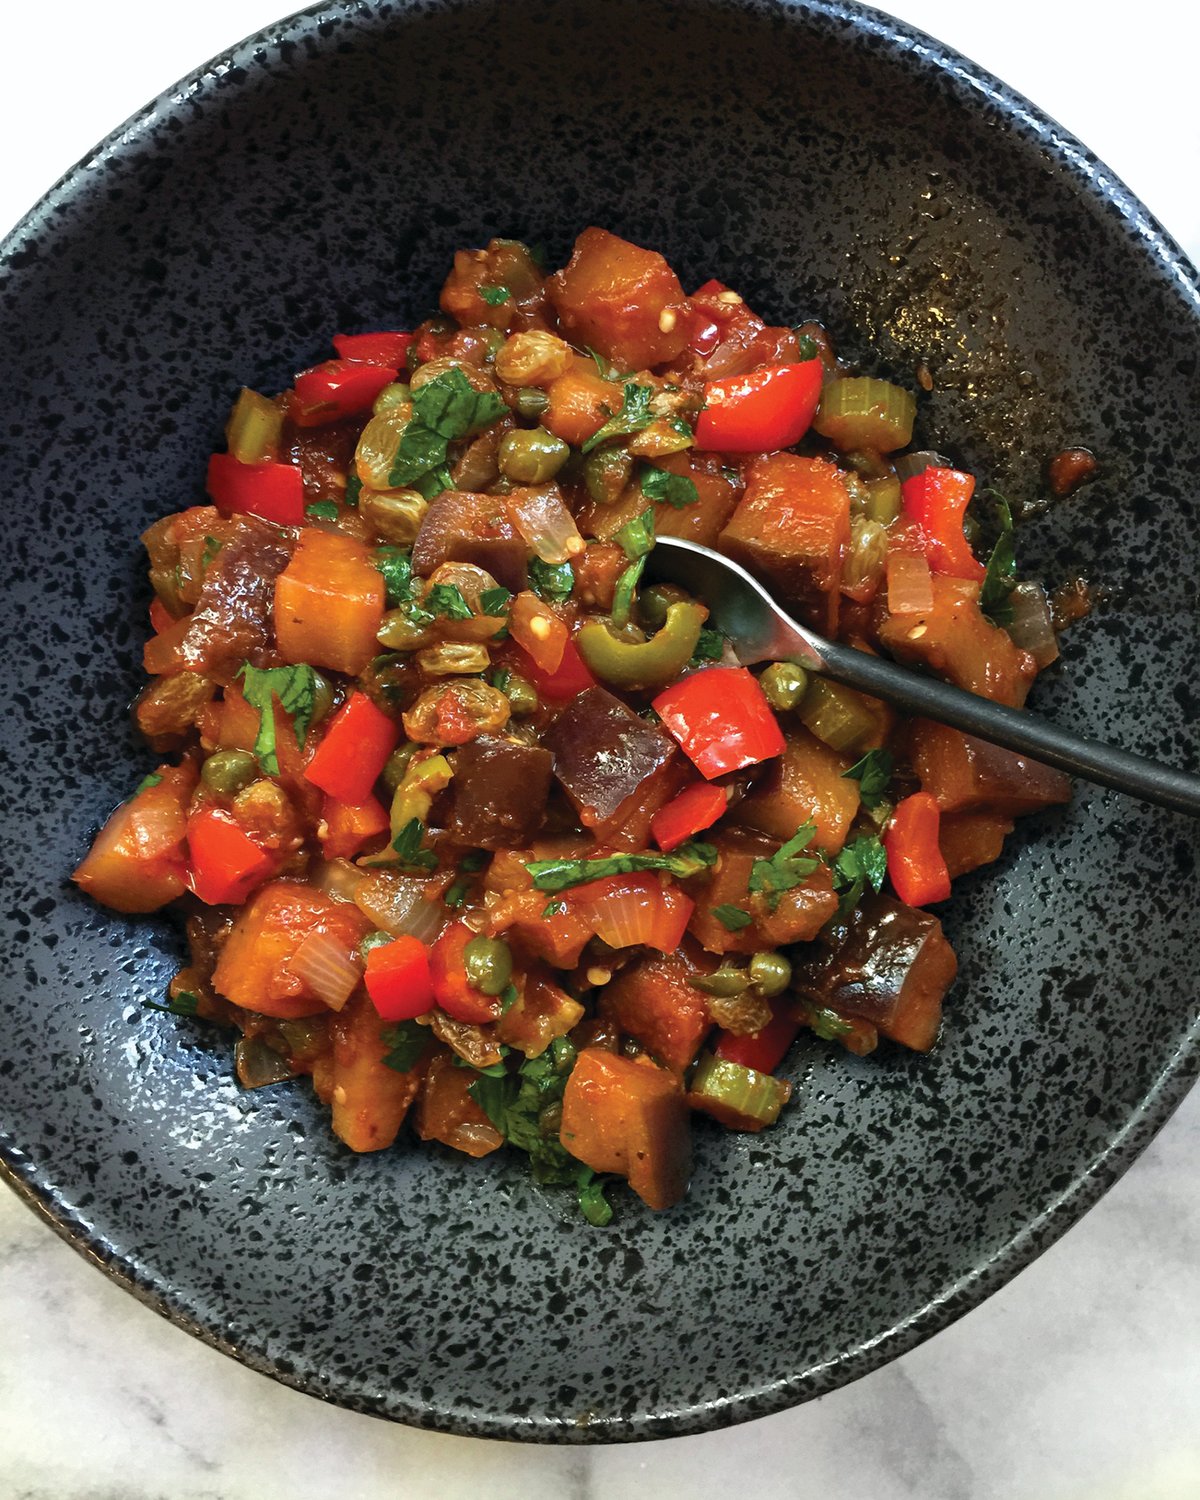 Caponata is a Sicilian vegetable stew or compote.